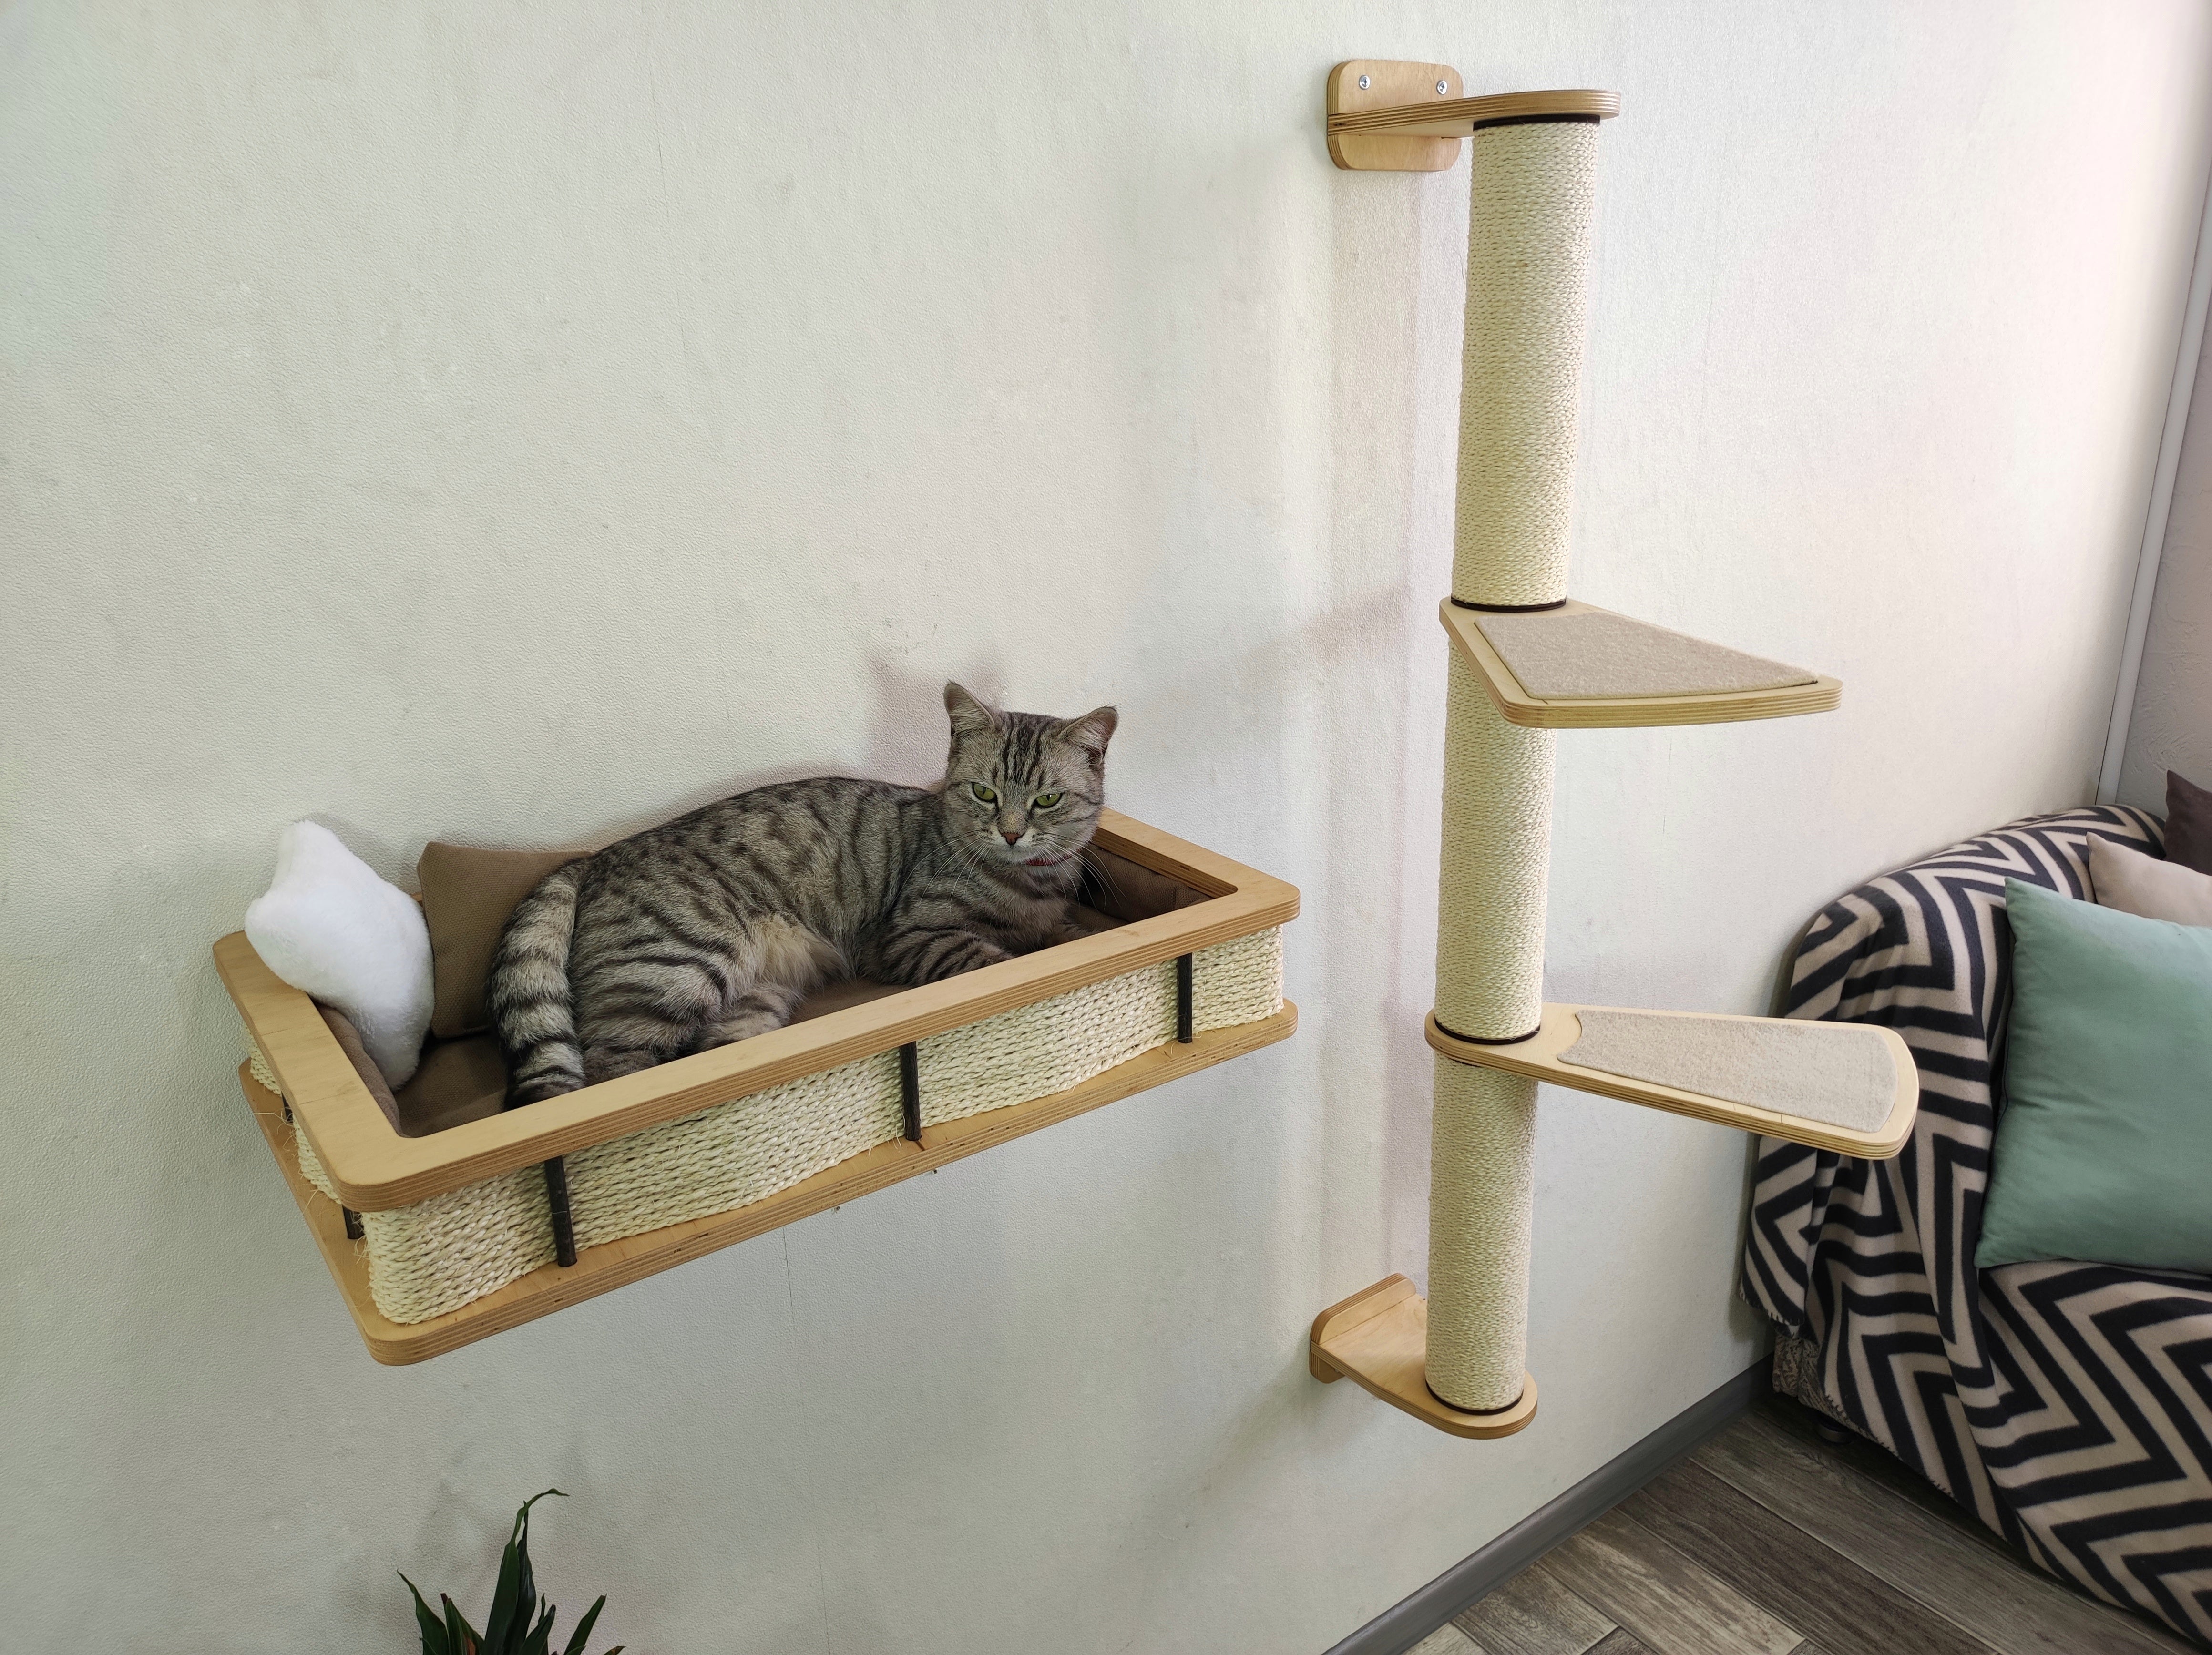 Cat furniture set - Light & Sratching post with Large shelf